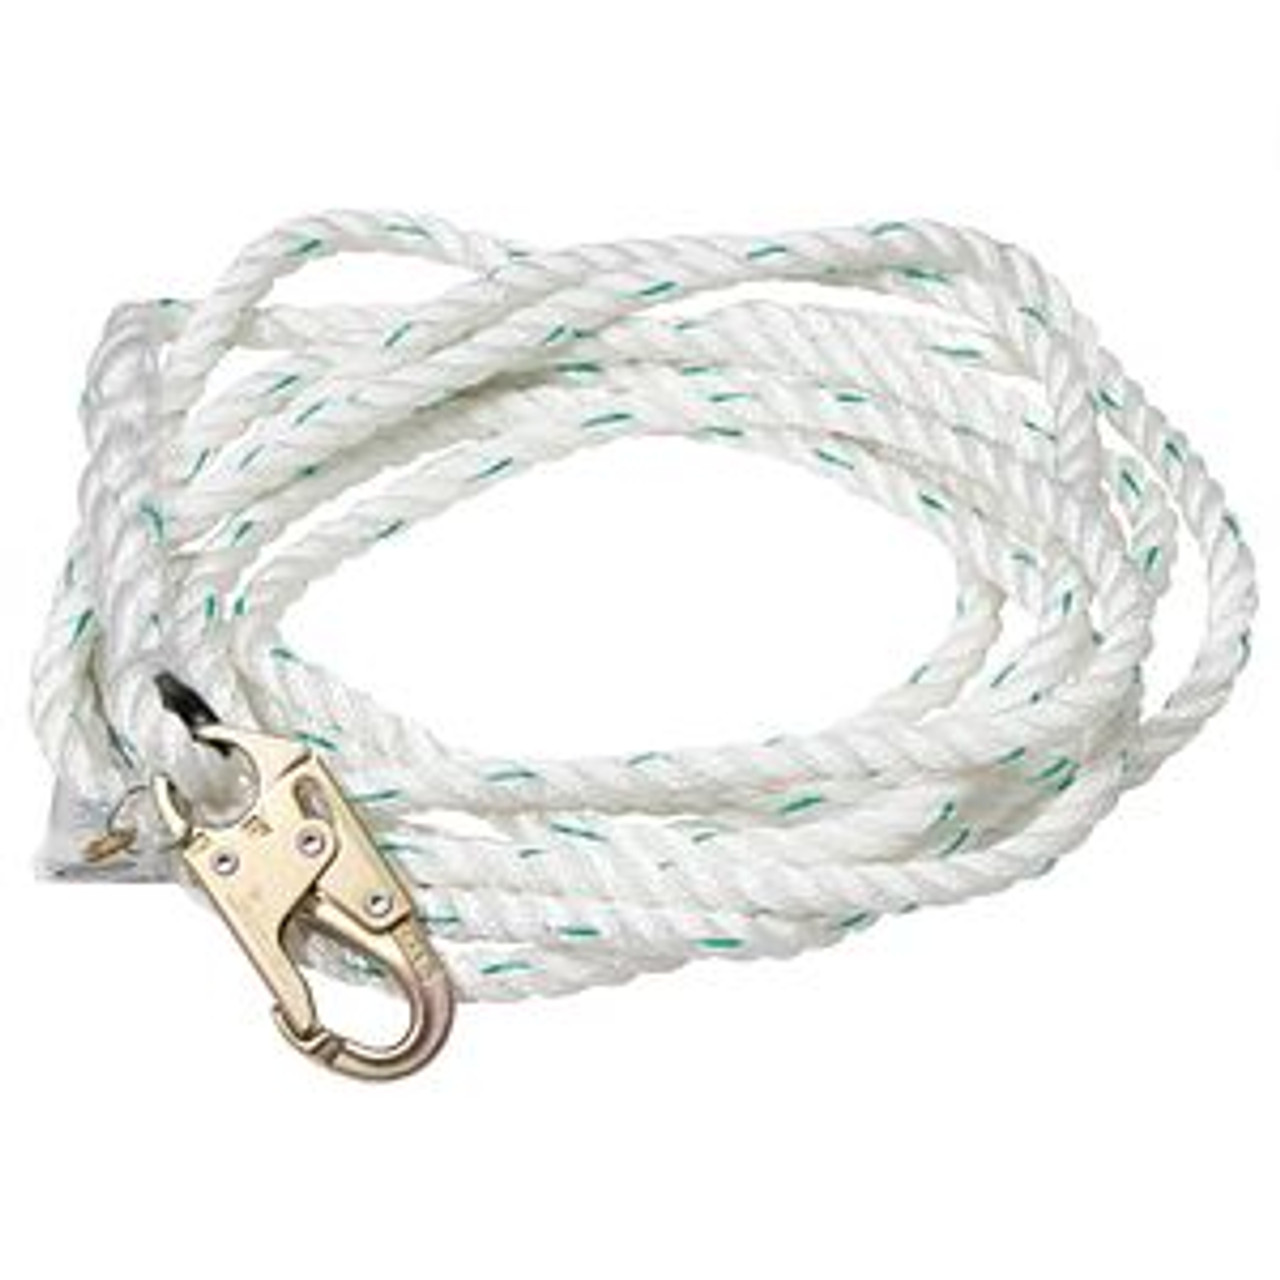 5/8” 3-Strand Fall Protection Safety Rope